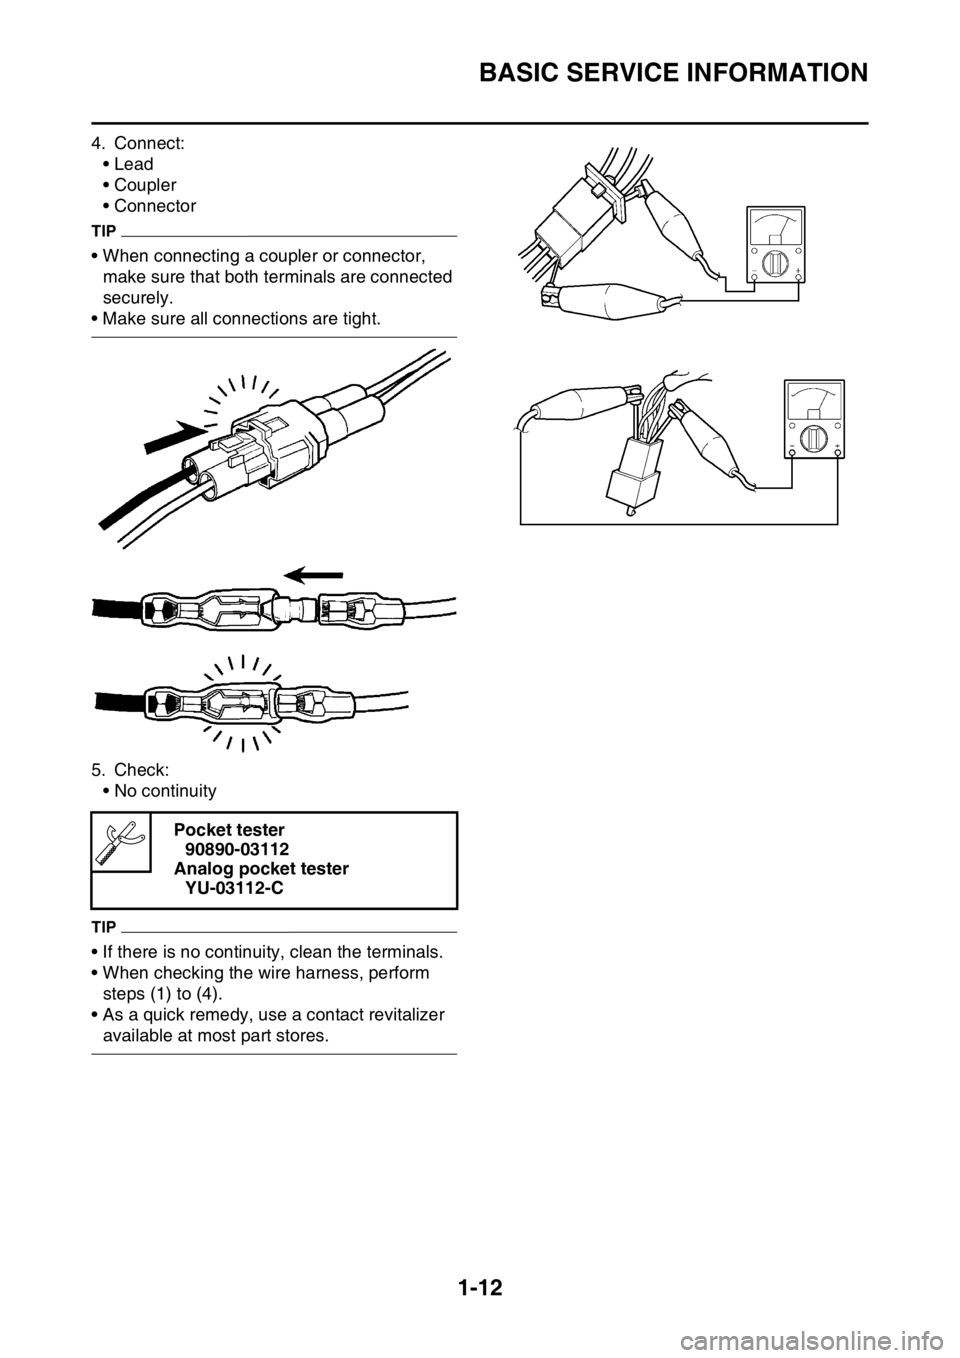 YAMAHA WR 450F 2016 Owners Manual BASIC SERVICE INFORMATION
1-12
4. Connect:• Lead
• Coupler
• Connector
TIP
• When connecting a coupler or connector, make sure that both terminals are connected 
securely.
• Make sure all co